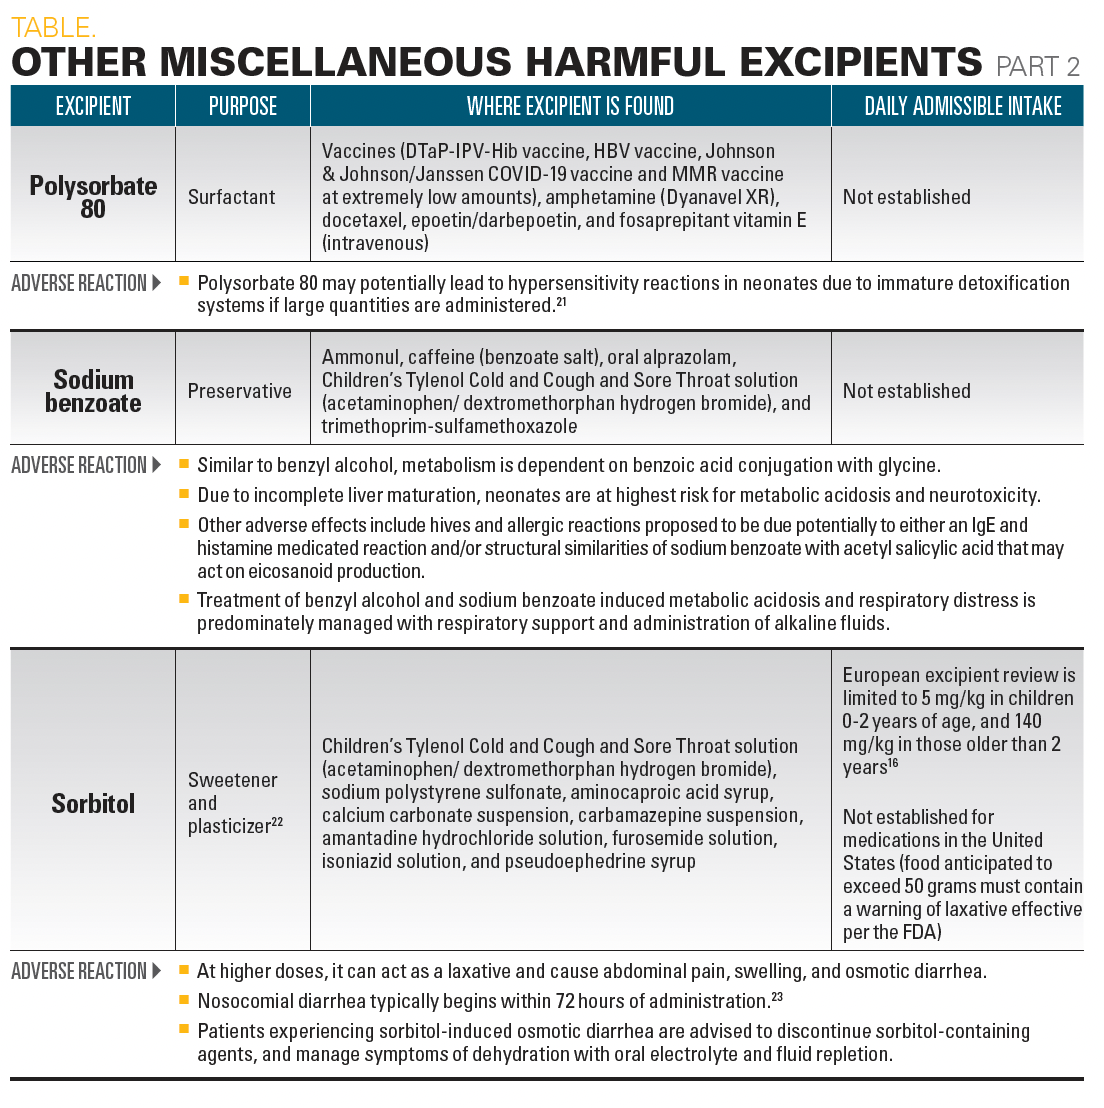 Conclusion of table of harmful excipients found in pharmaceuticals